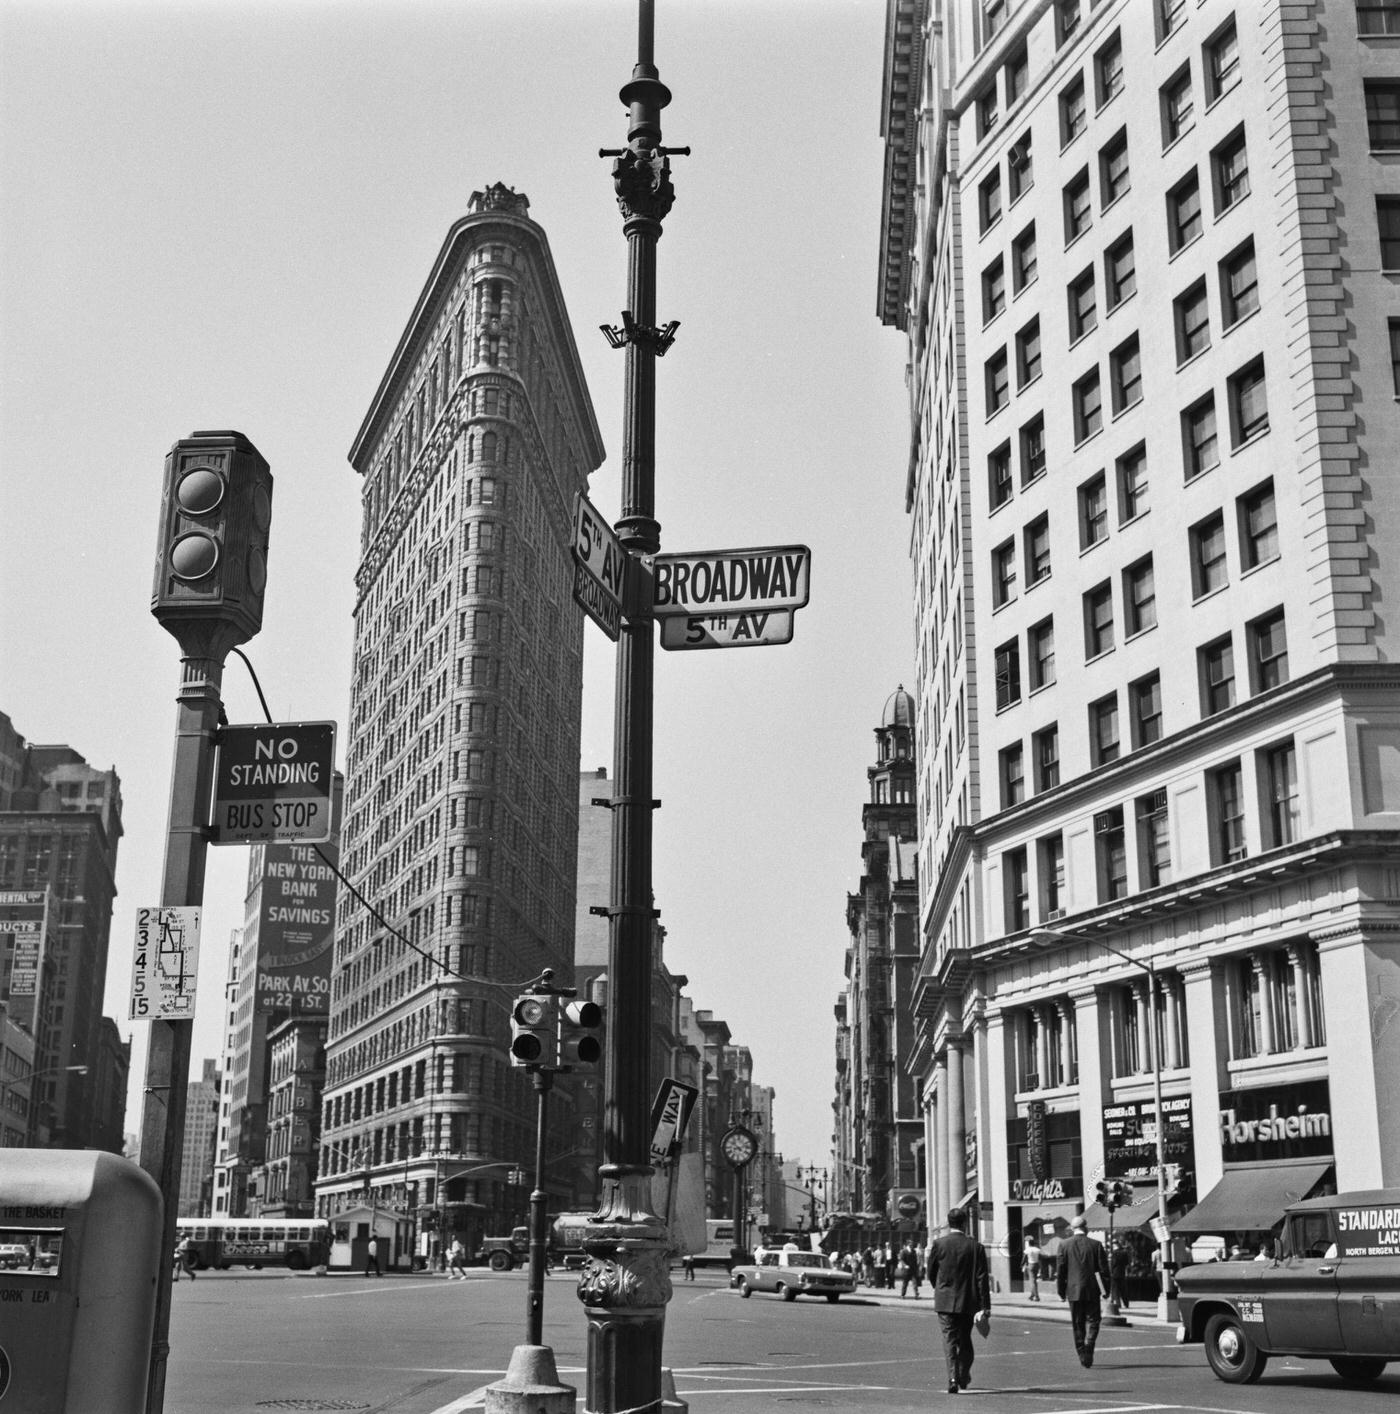 Flatiron Building On The Junction Of Fifth Avenue And Broadway, Manhattan, 1965